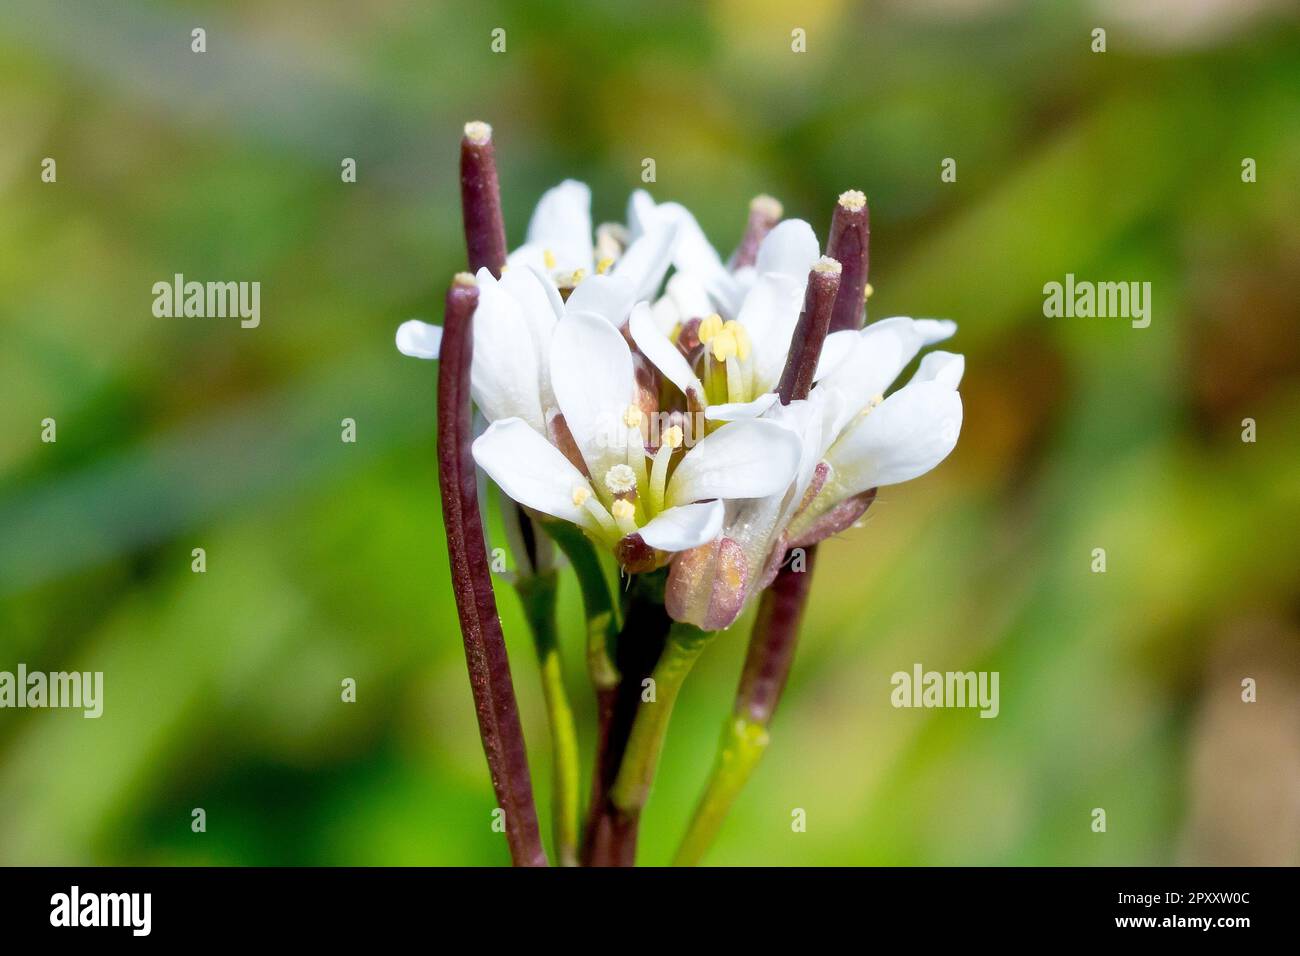 Hairy Bittercress (cardamine hirsuta), close up of the small white flowers and seedpods of the common grassland plant. Stock Photo